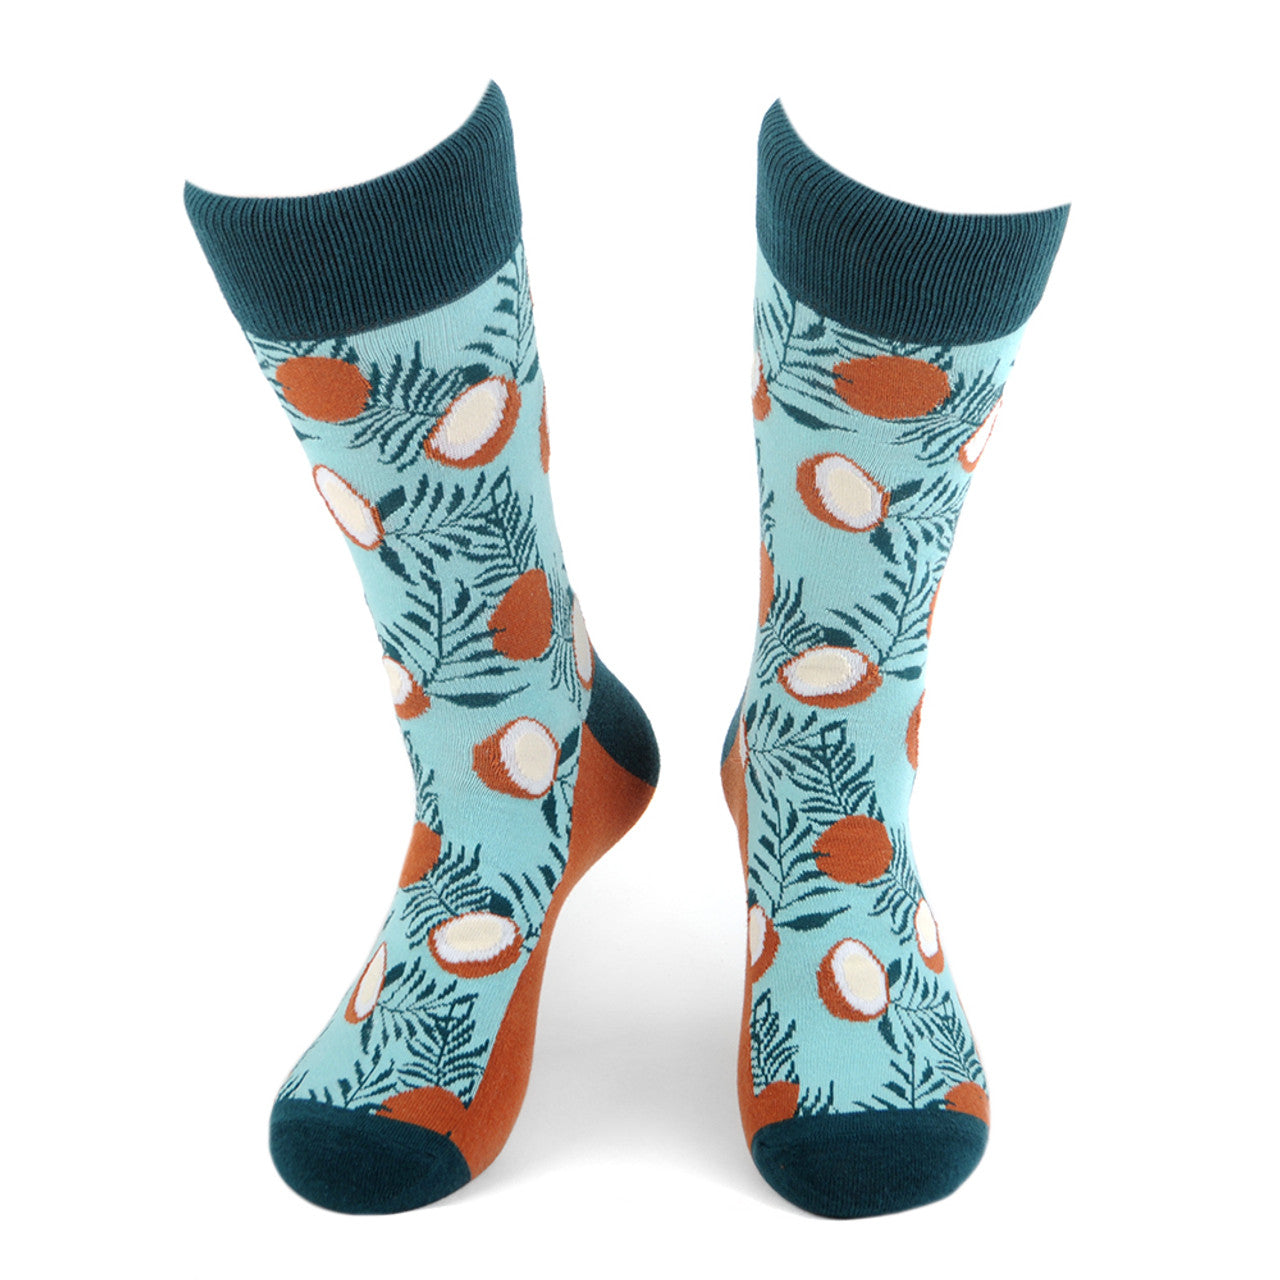 Men's Tropical Crew Sock - Palm Leaves and Coconuts